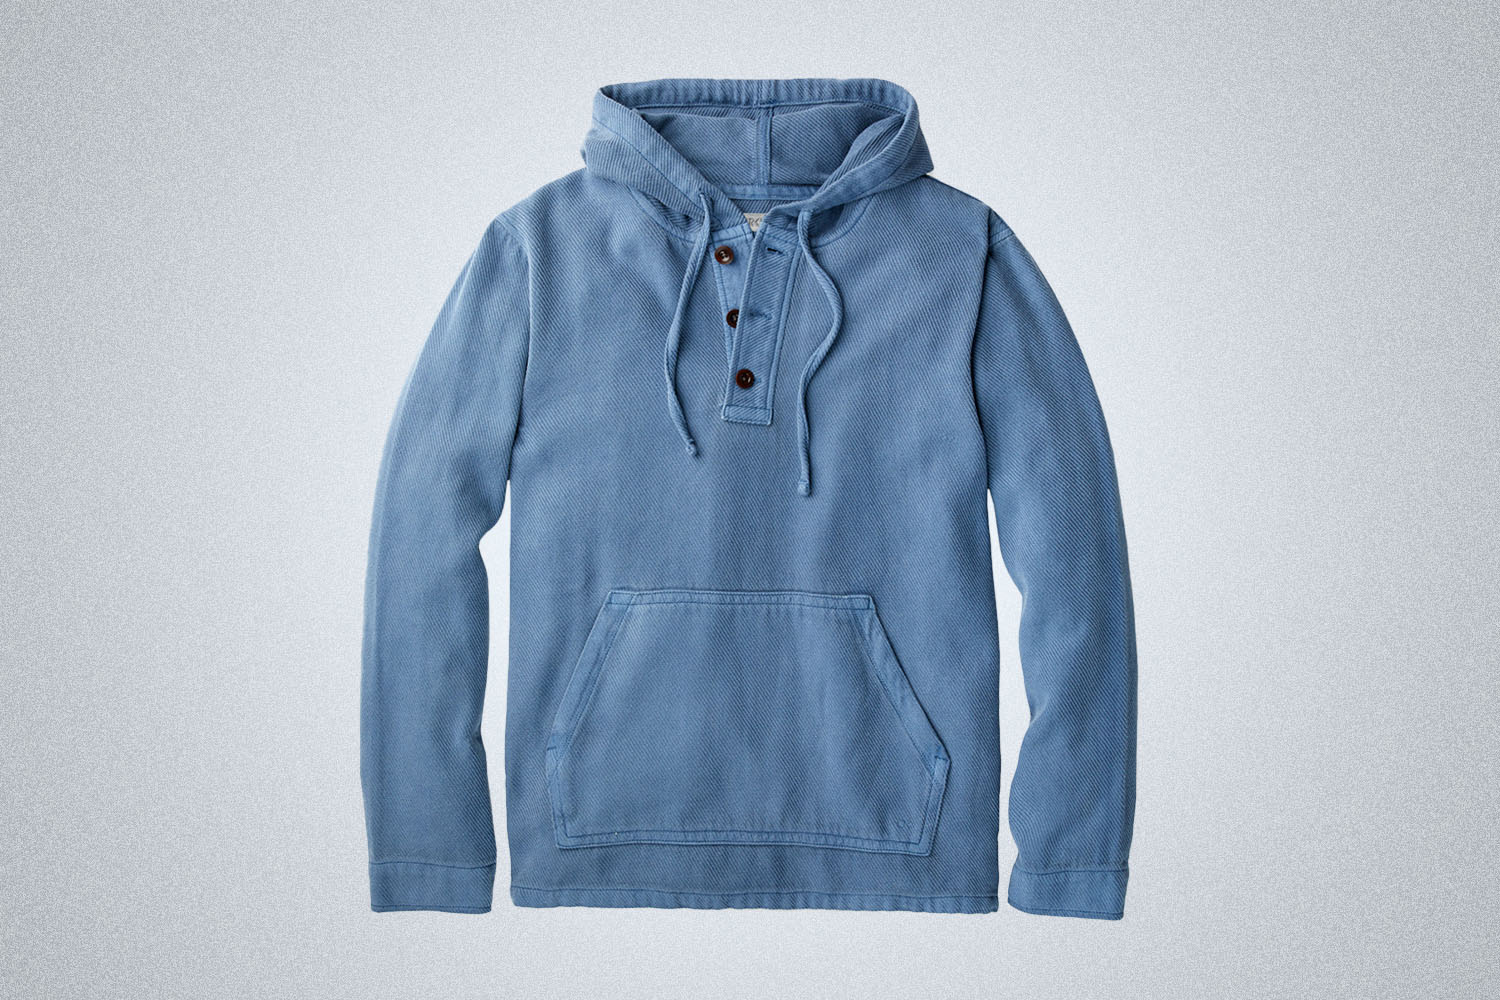 a light blue hoodie on a grey background